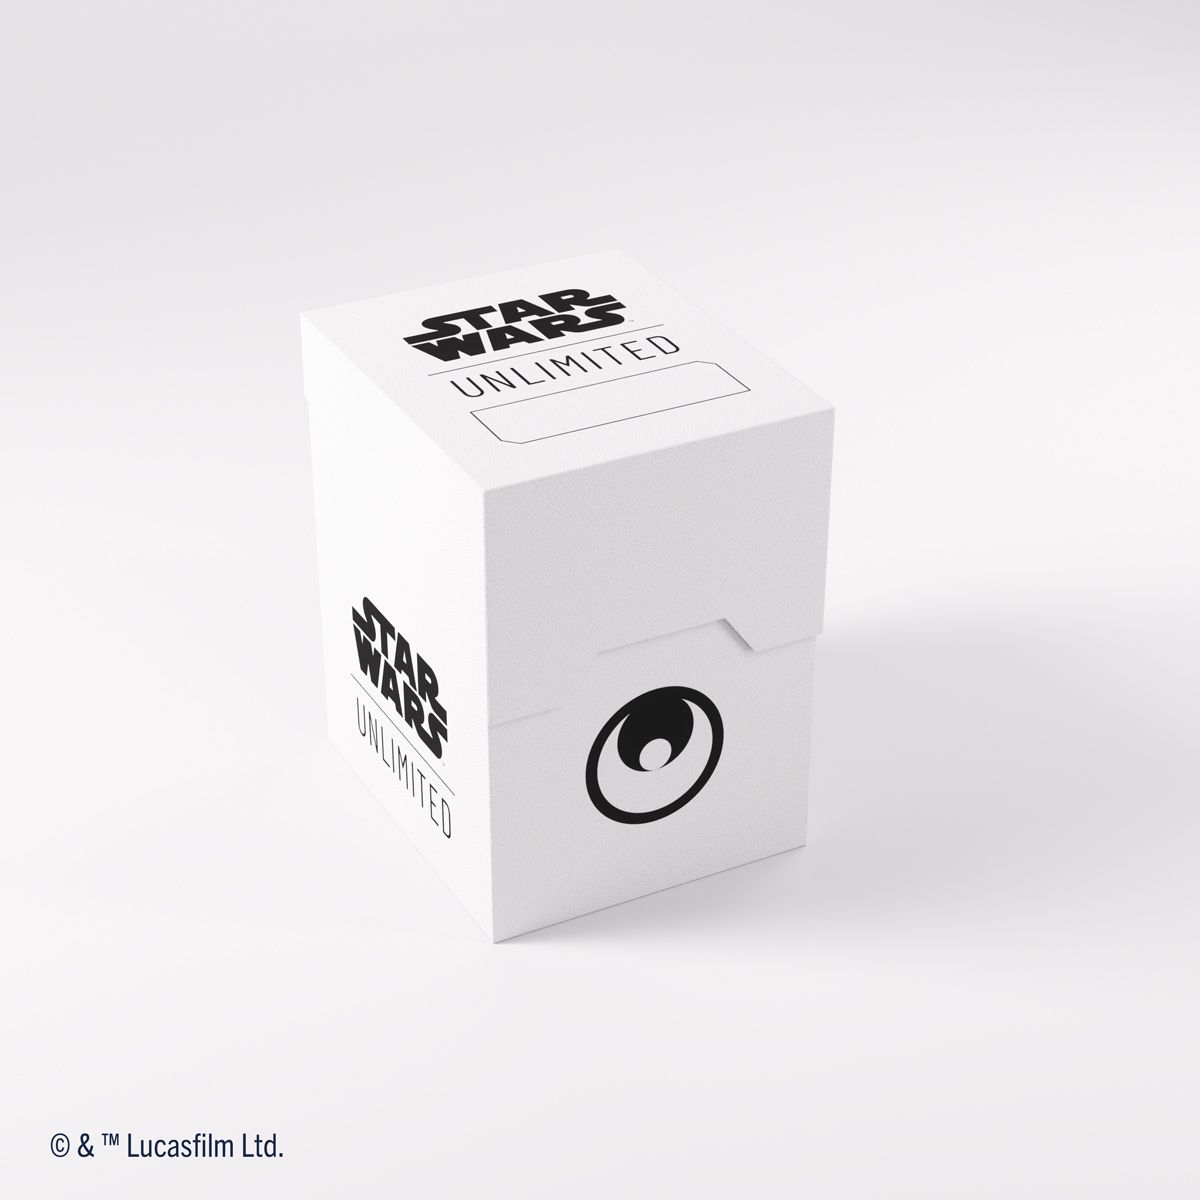 Gamegenic - Deck Box - Soft Crate - Star Wars: Unlimited - White / Black